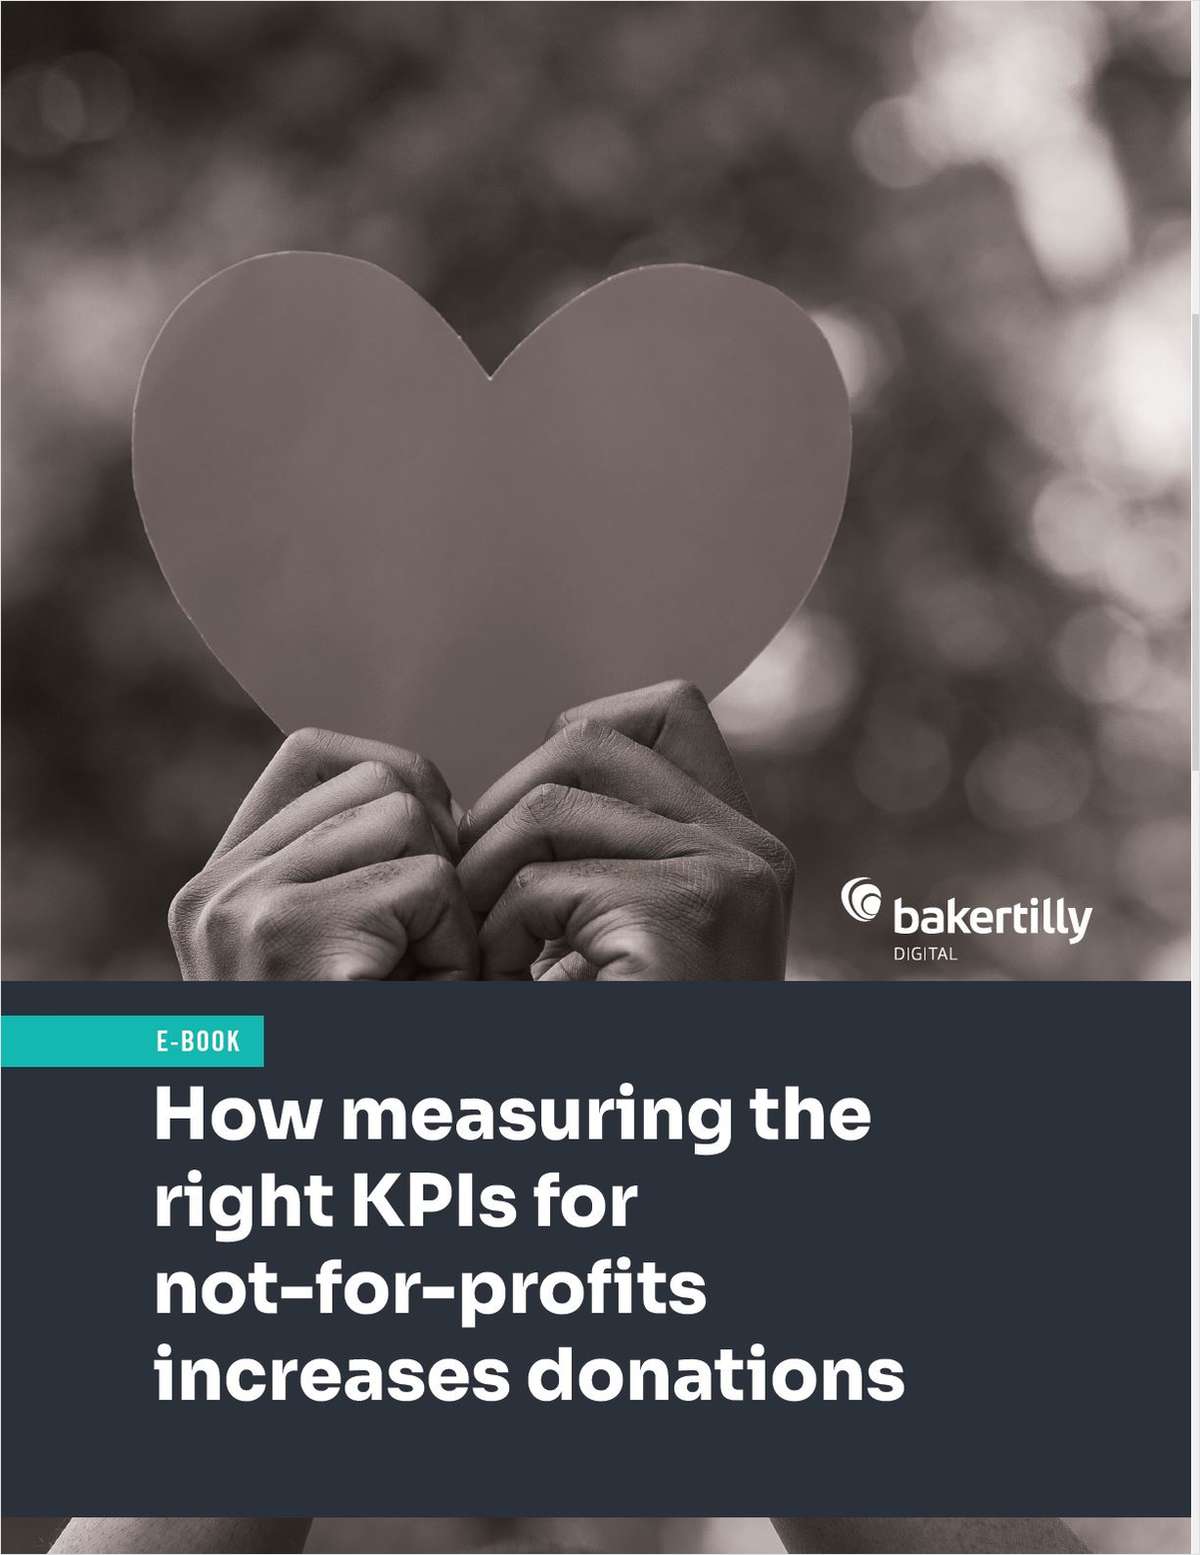 How measuring the right KPIs for not-for-profits increases donations